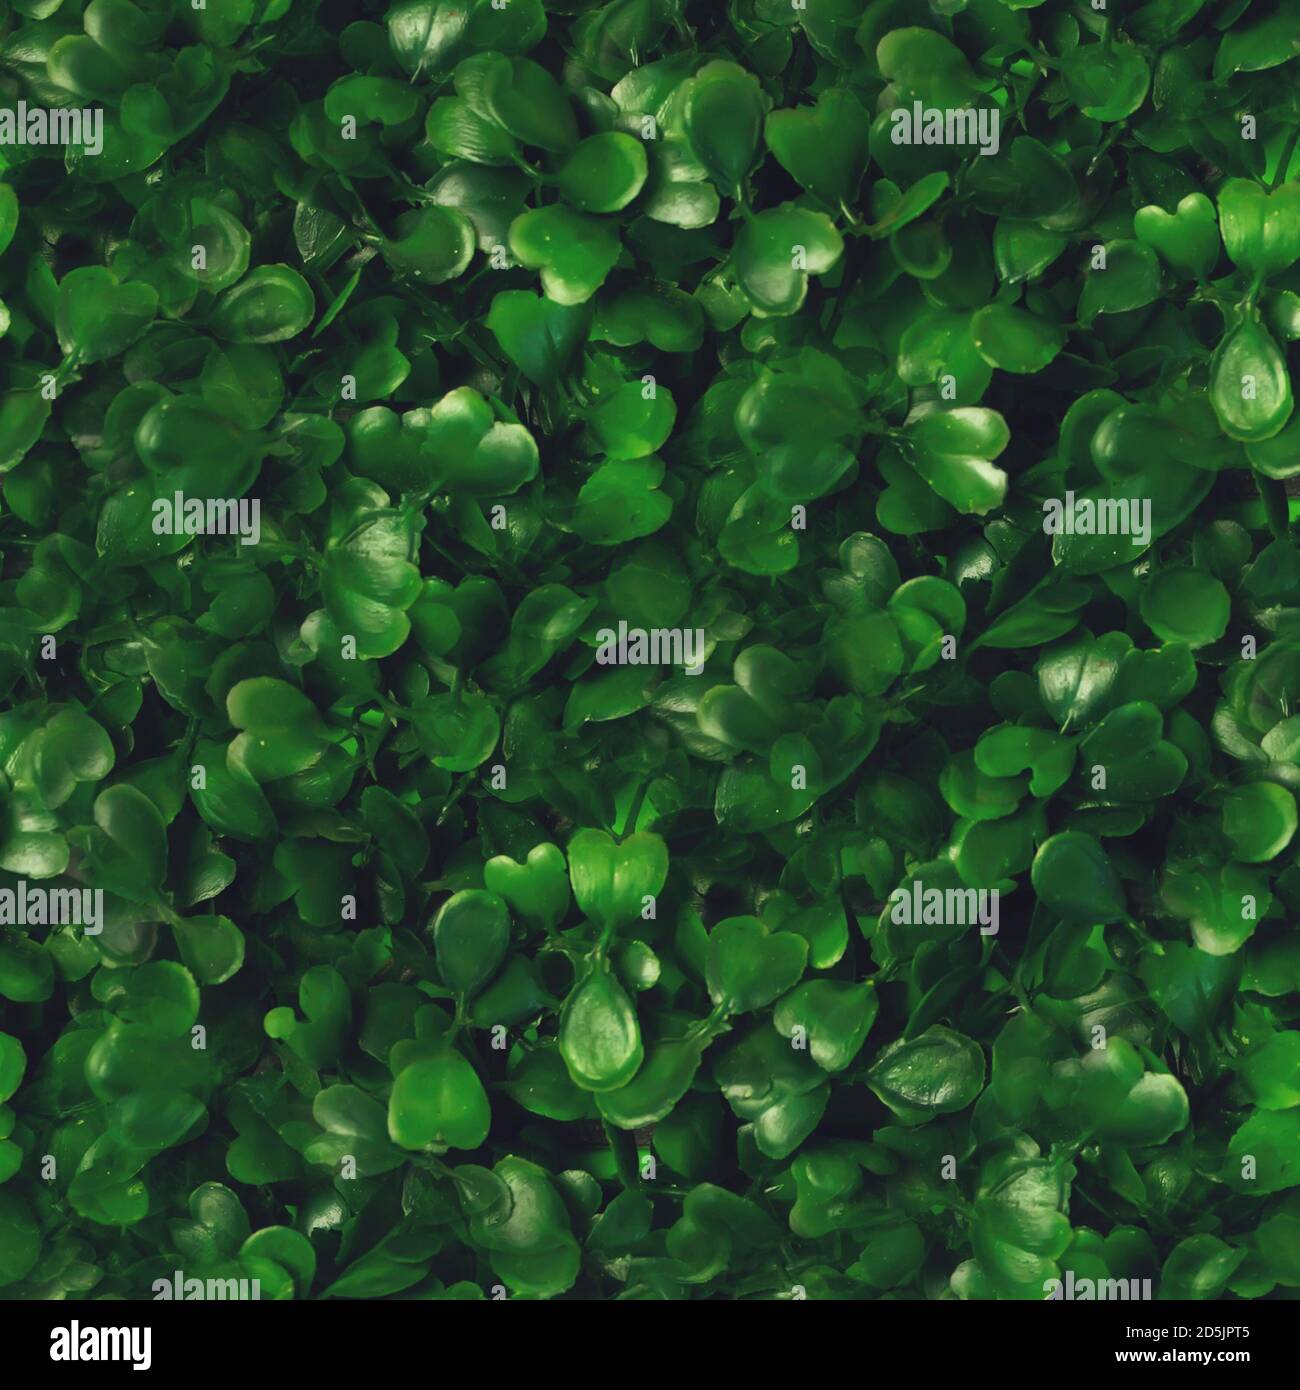 Seamless pattern green grass texture background. Starweed -winterweed, chickweed, satinflower, Stellaria media- plants. Good green leaves. Green backg Stock Photo